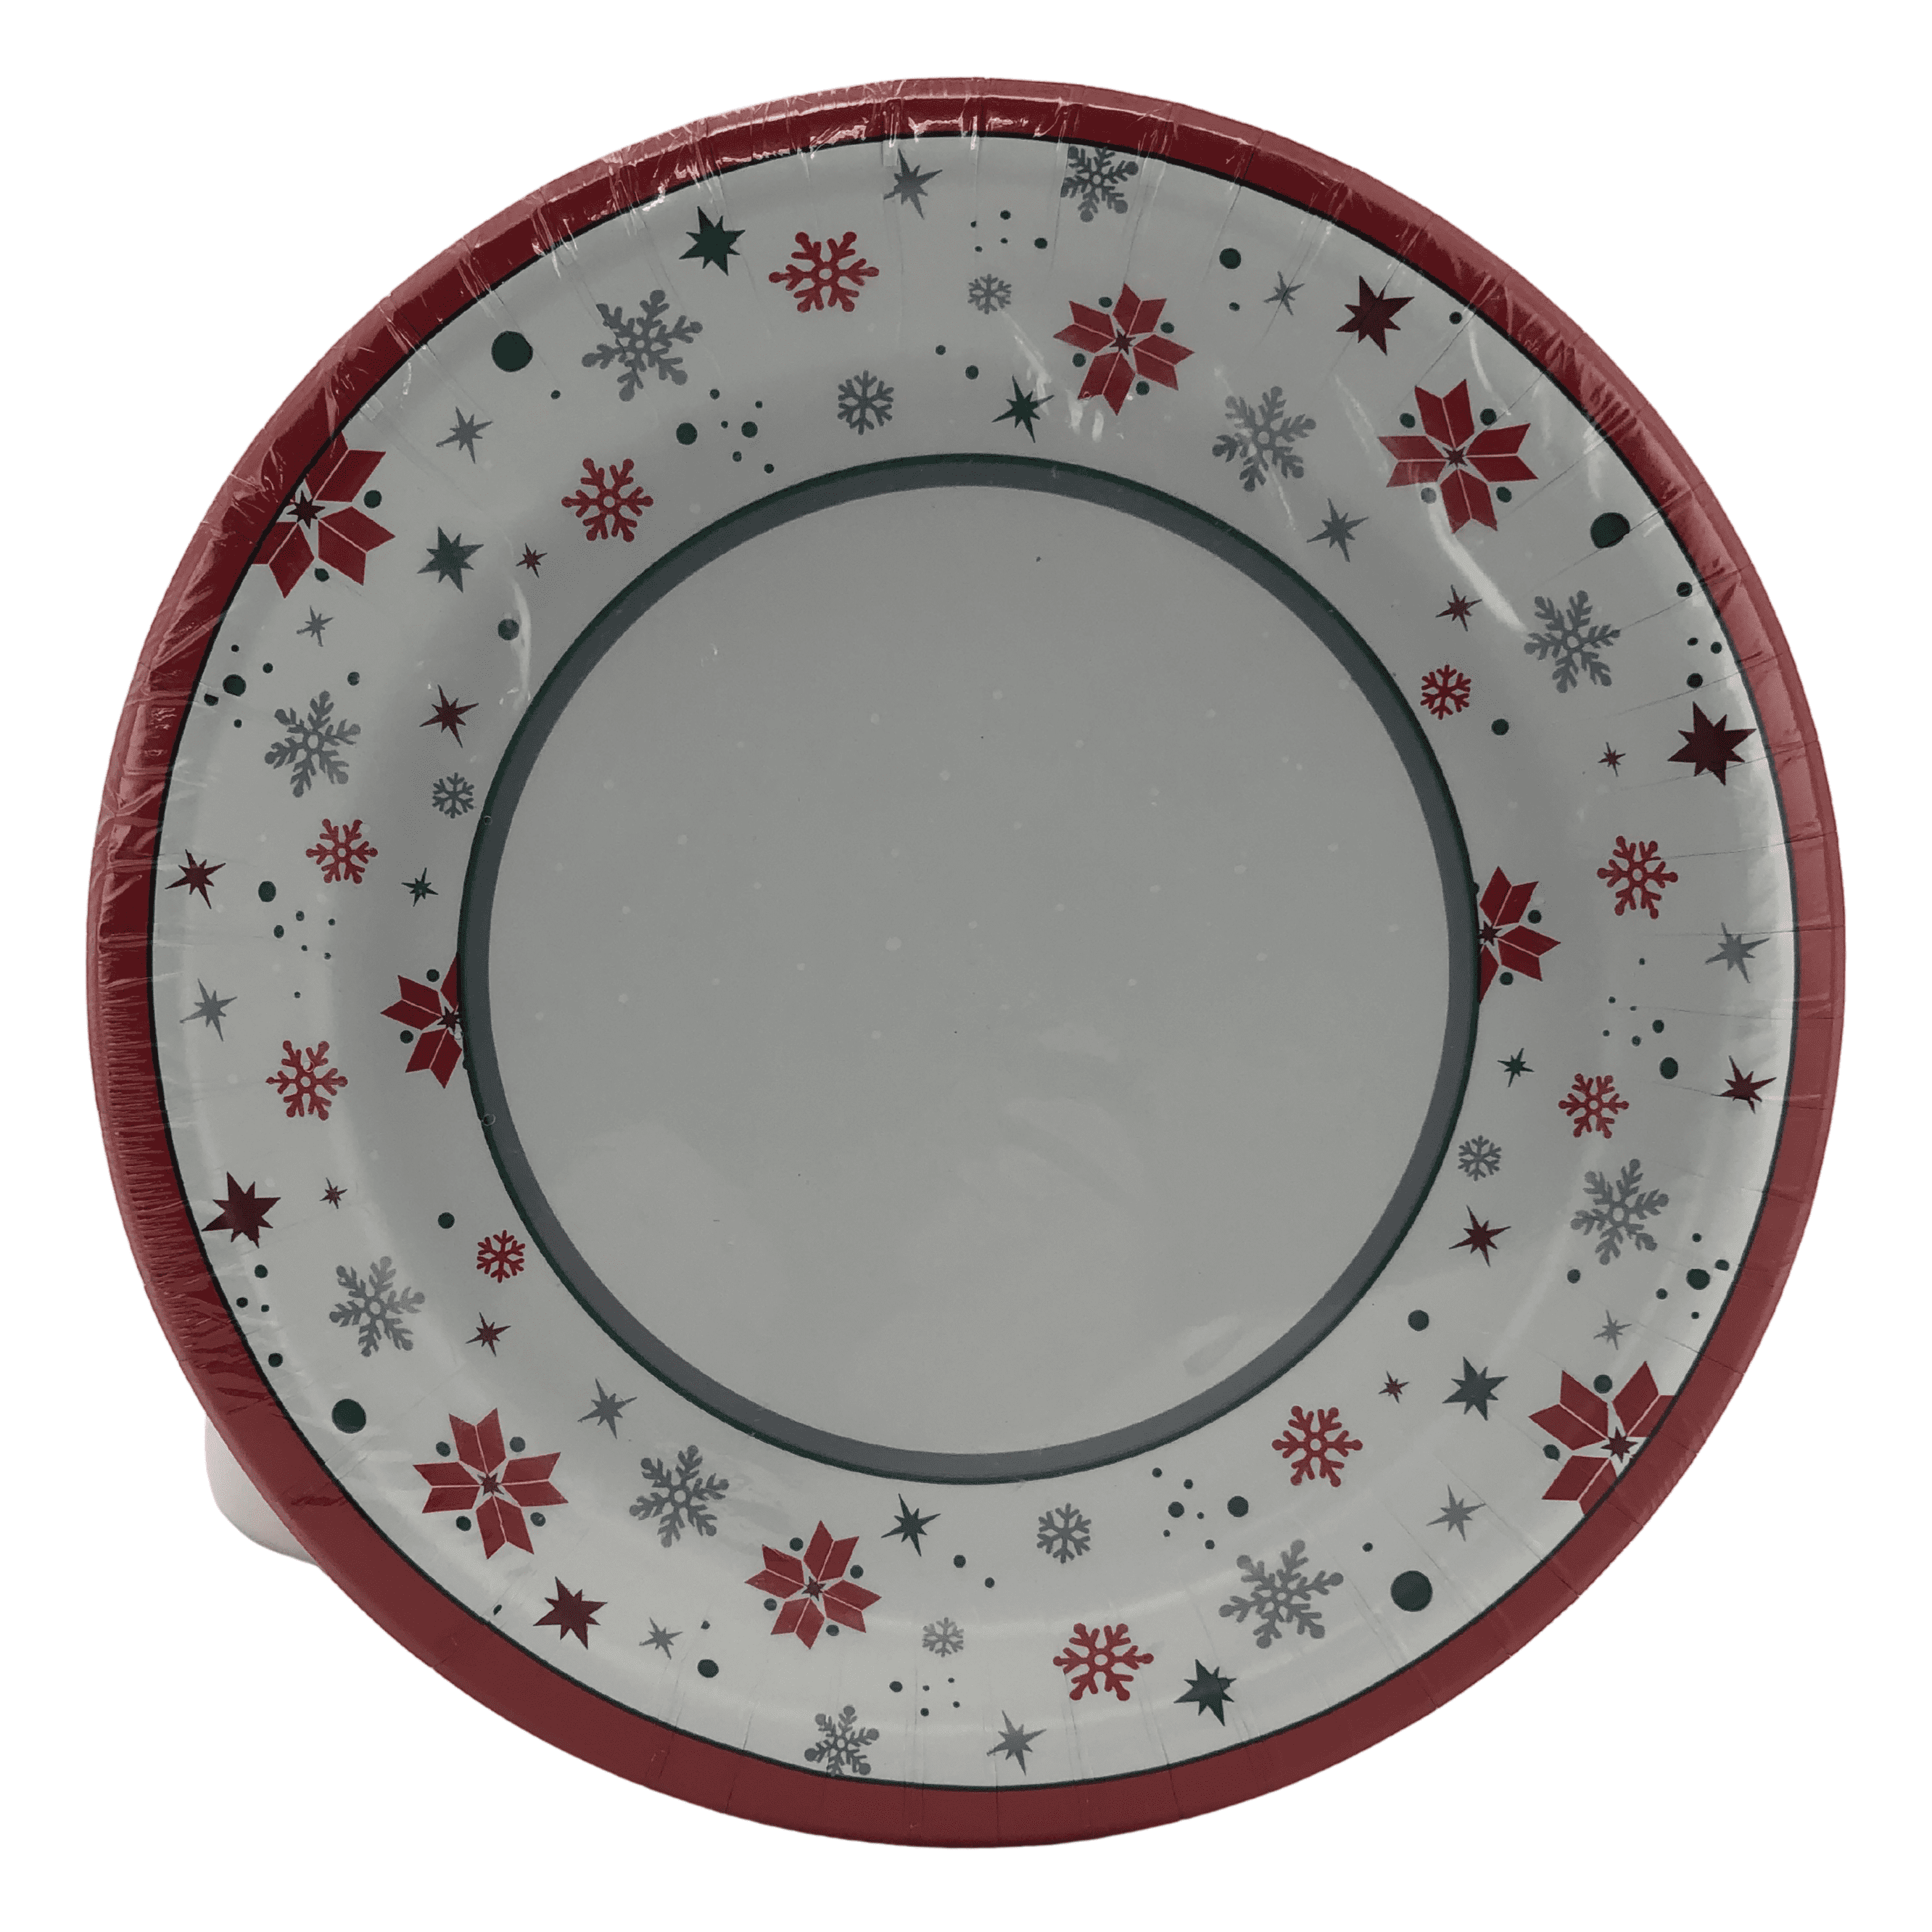 Concept Mode Christmas themed Paper Plates in a pack of 75. 10 inch Diameter with a raised edge